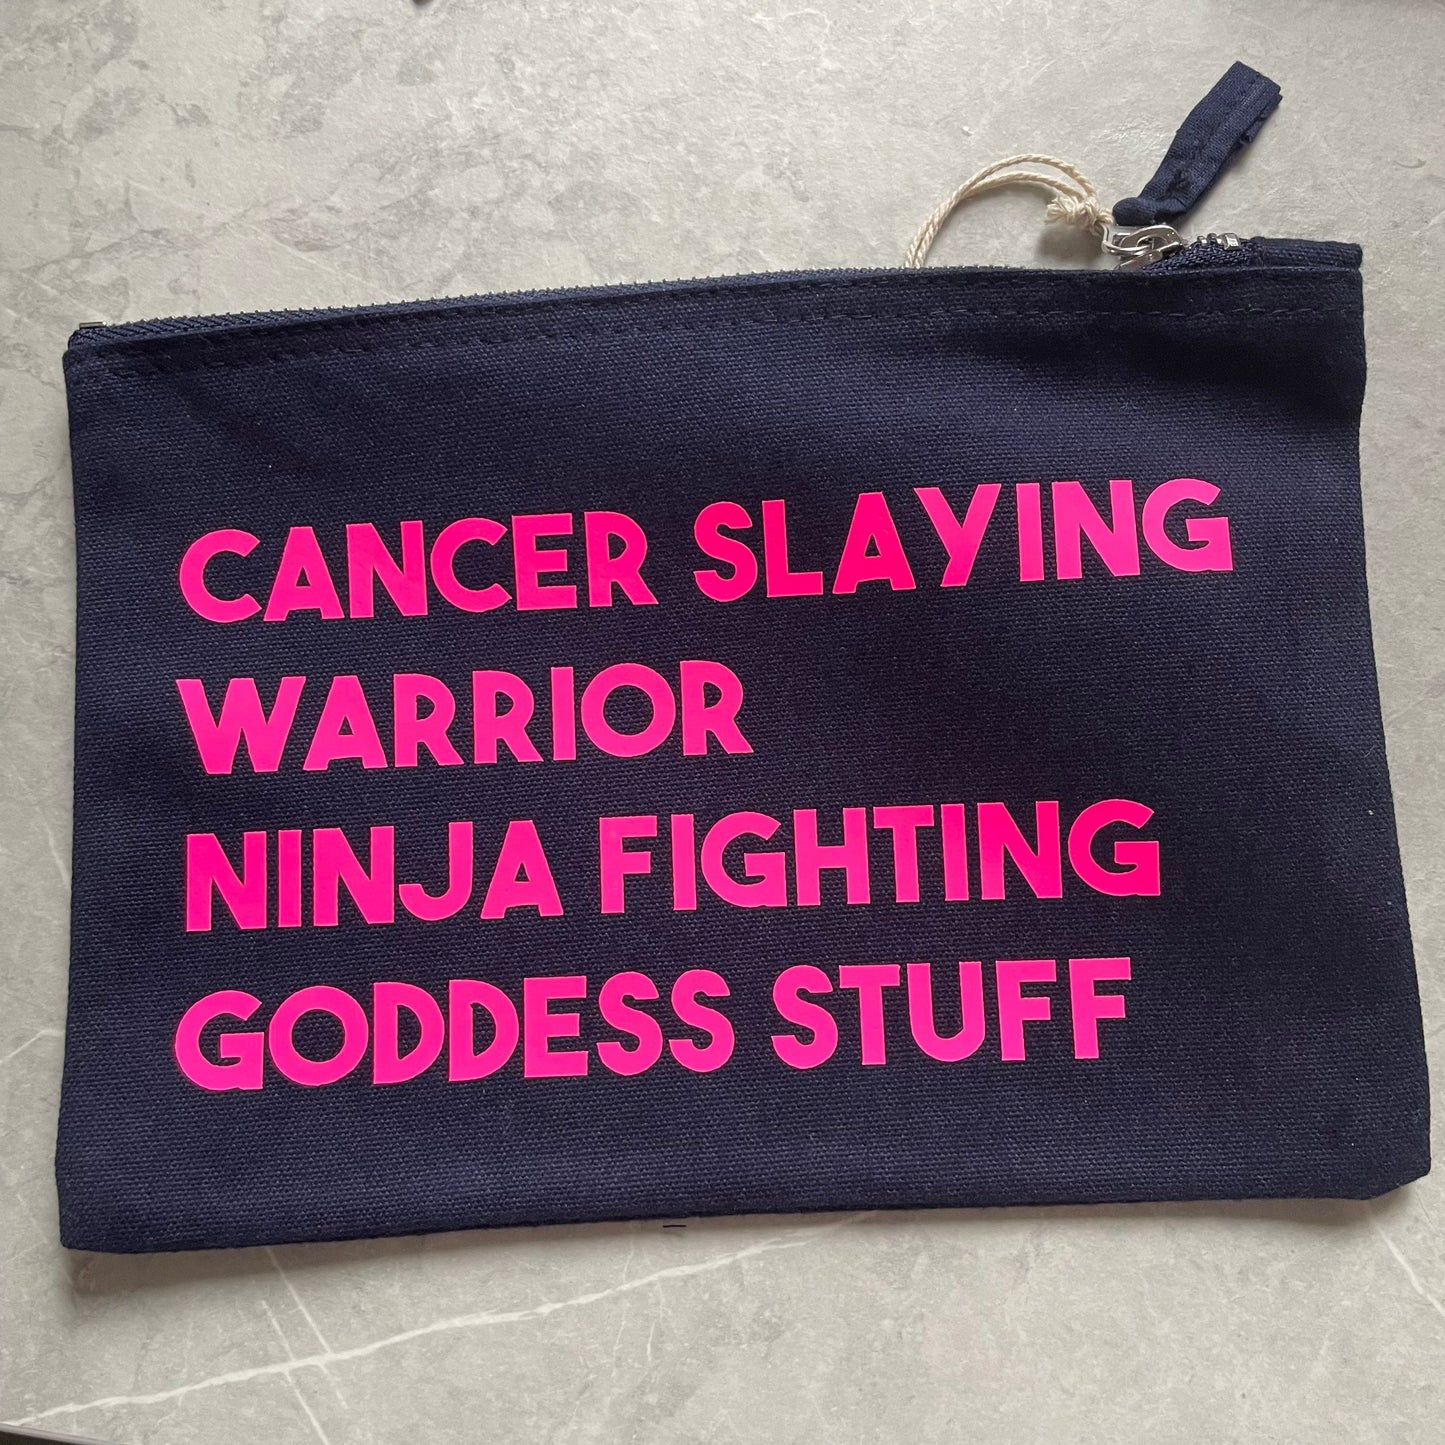 Cancer warrior pouch, chemo meds bag for travel and holidays, bag for all chemo stuff, friend going through cancer, cancer cheer up gifts